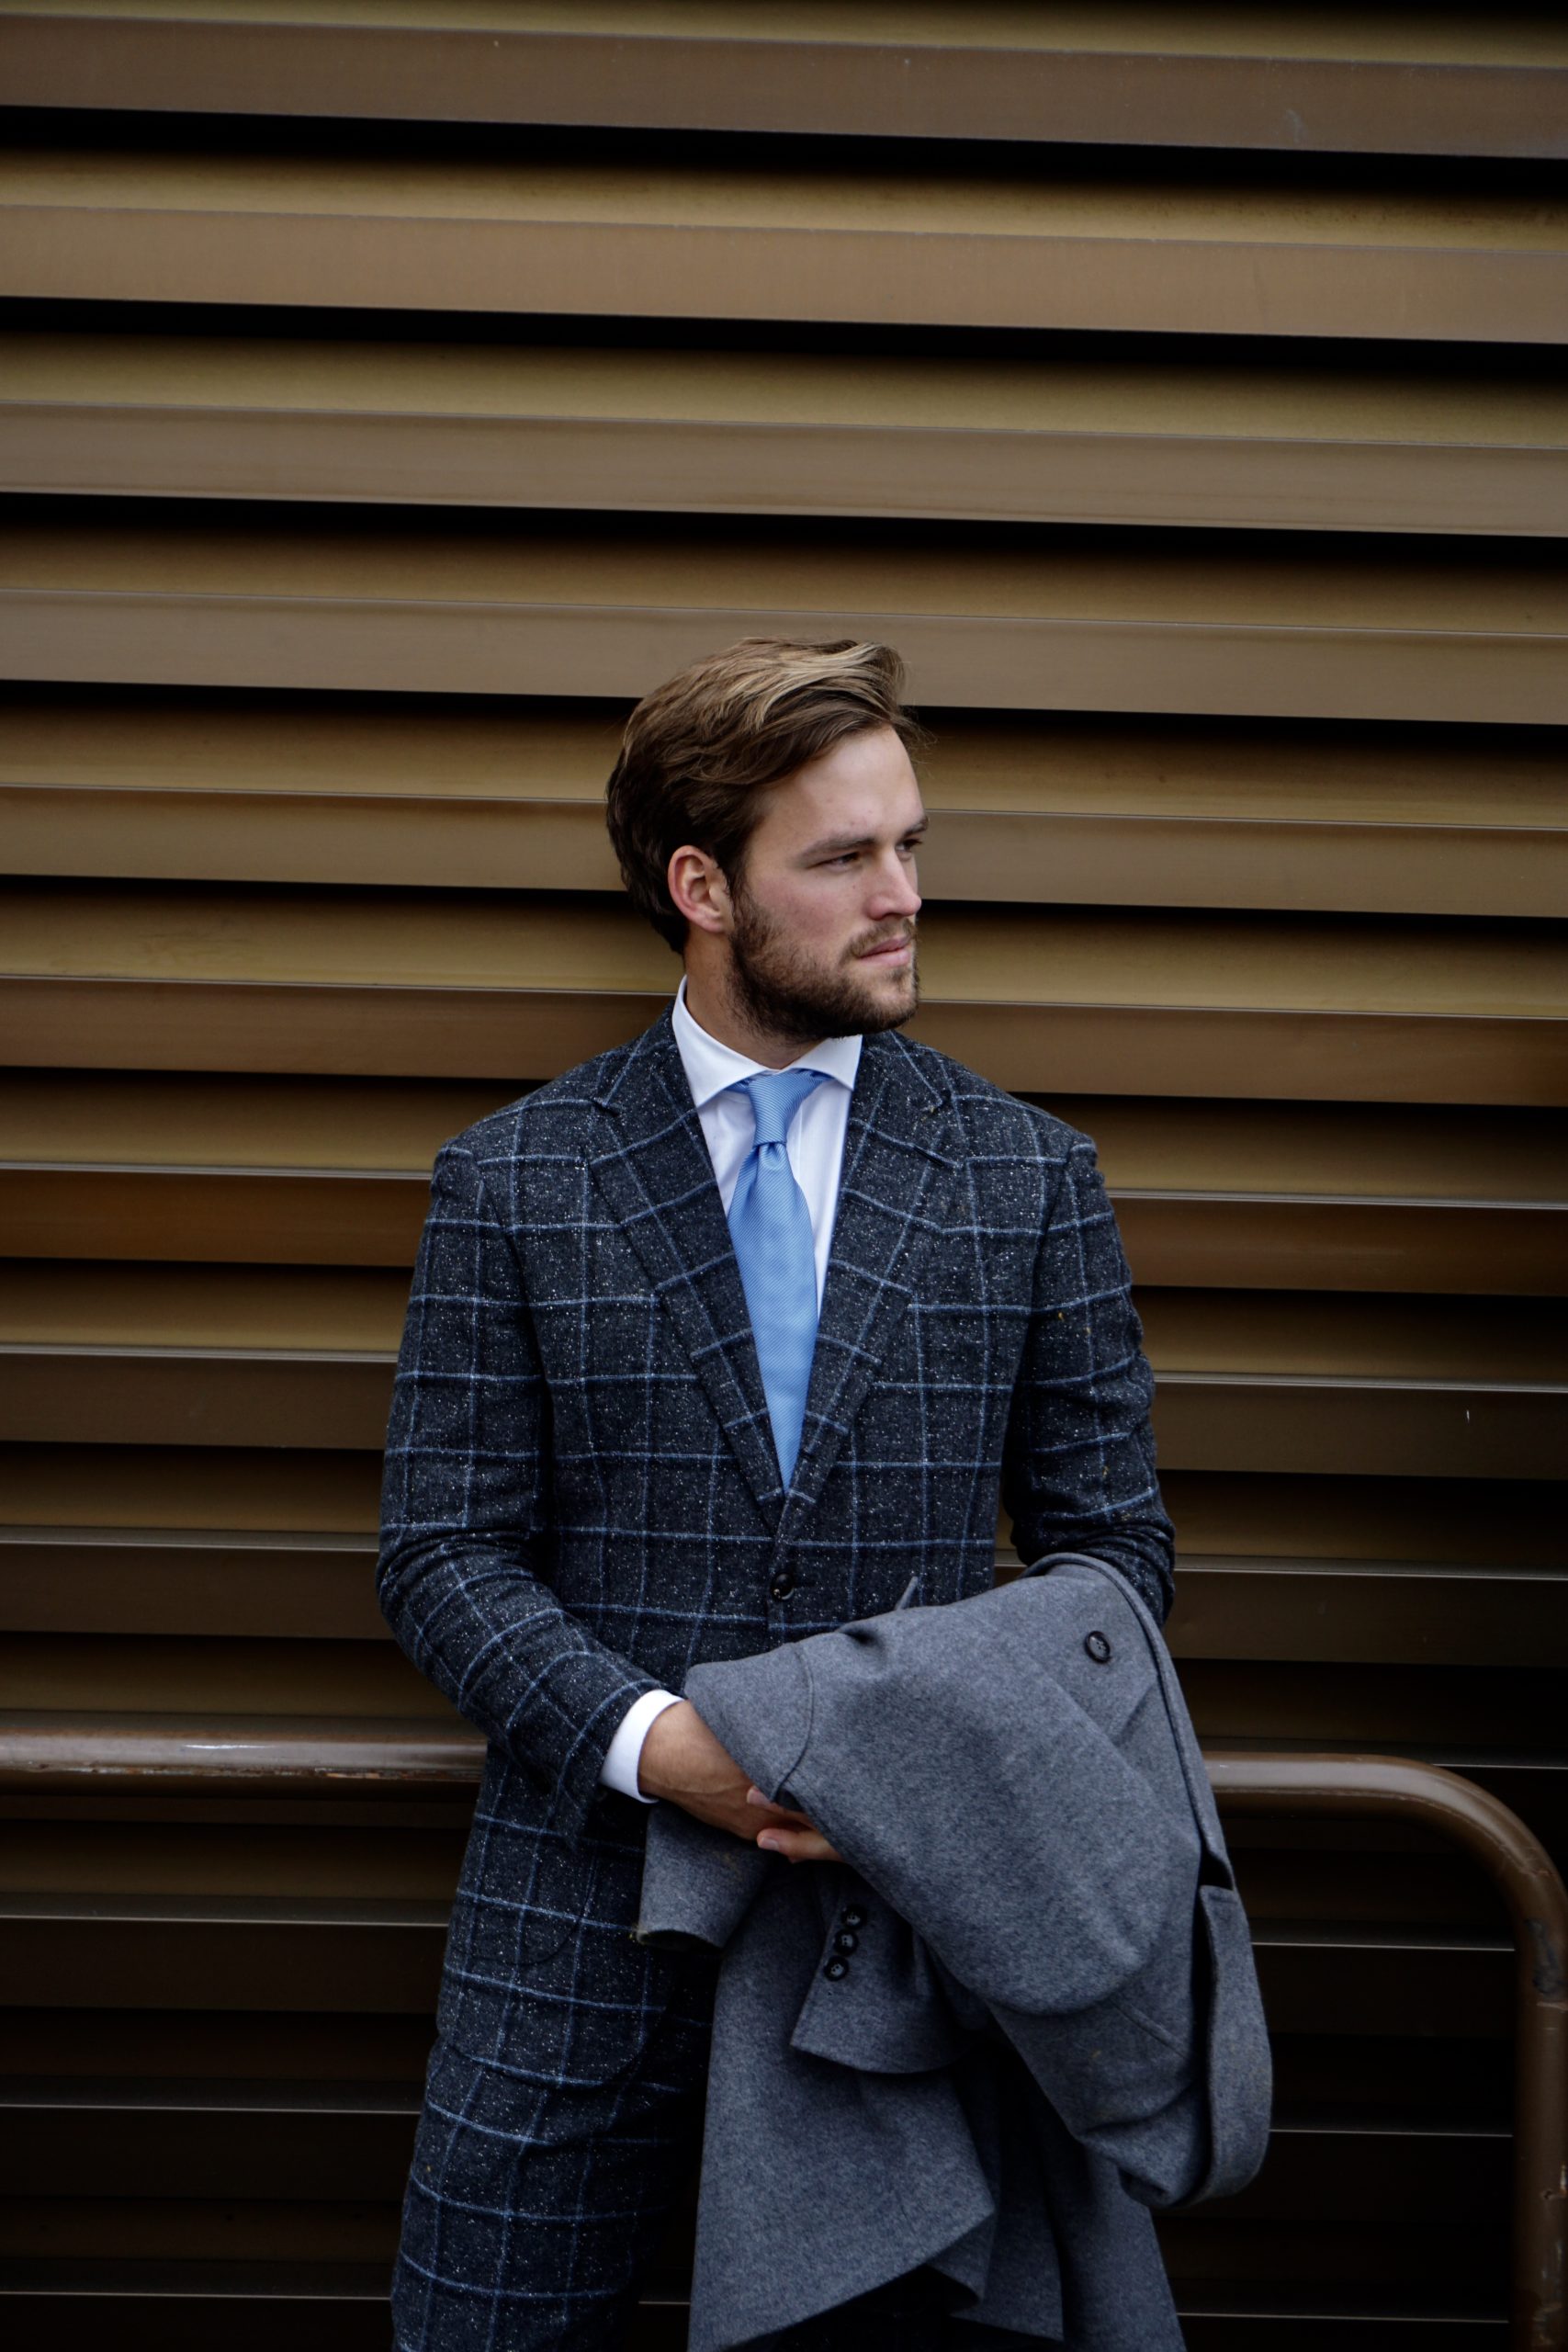 Pitti-uomo-checkered-suit-blue-tie-trench-coat-style-man-3 - Carl Navè ...